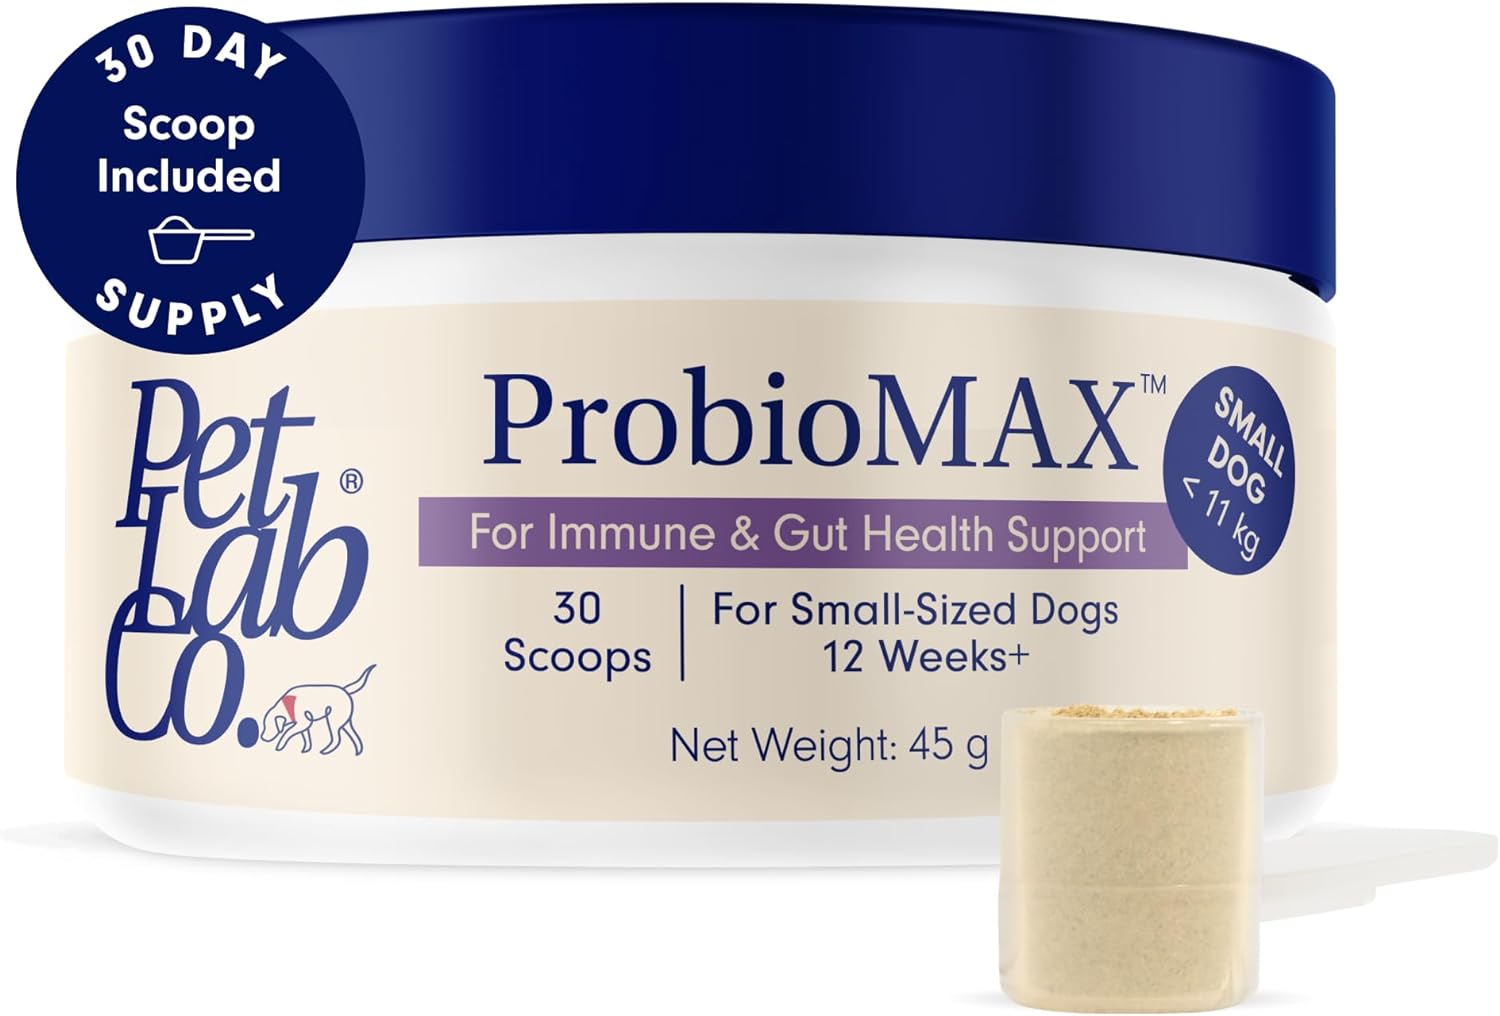 PetLab Co. ProbioMAX - Supports Gut Flora & Targets Seasonal Discomfort – Easy to Use – Helps Maintain a Normal Immune Response - Formulated for Small Dogs?Petlab Co. ProbioMAX for Small Dogs